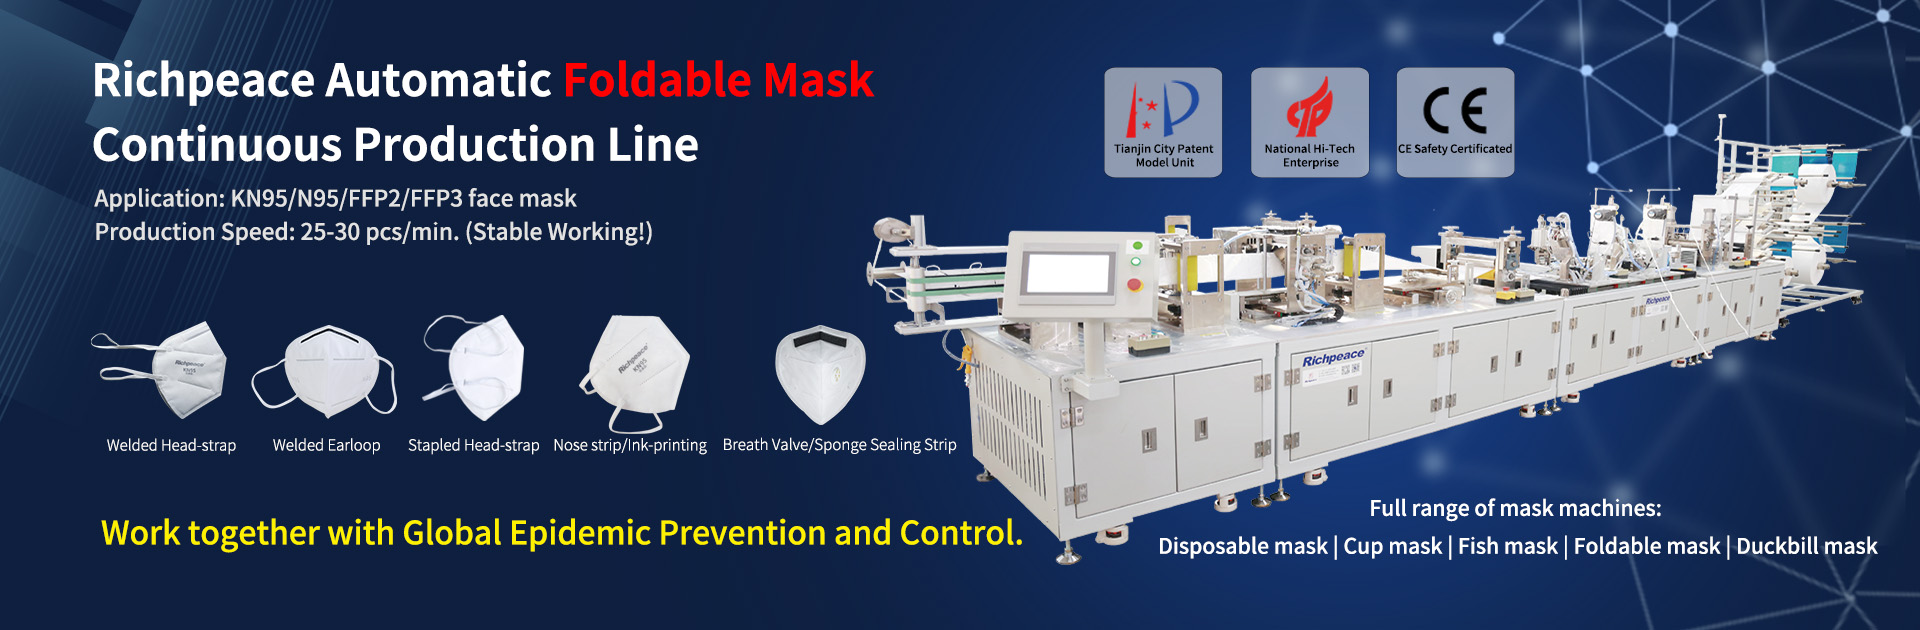 Foldable Mask Continuous Production Line (Headband Welding)